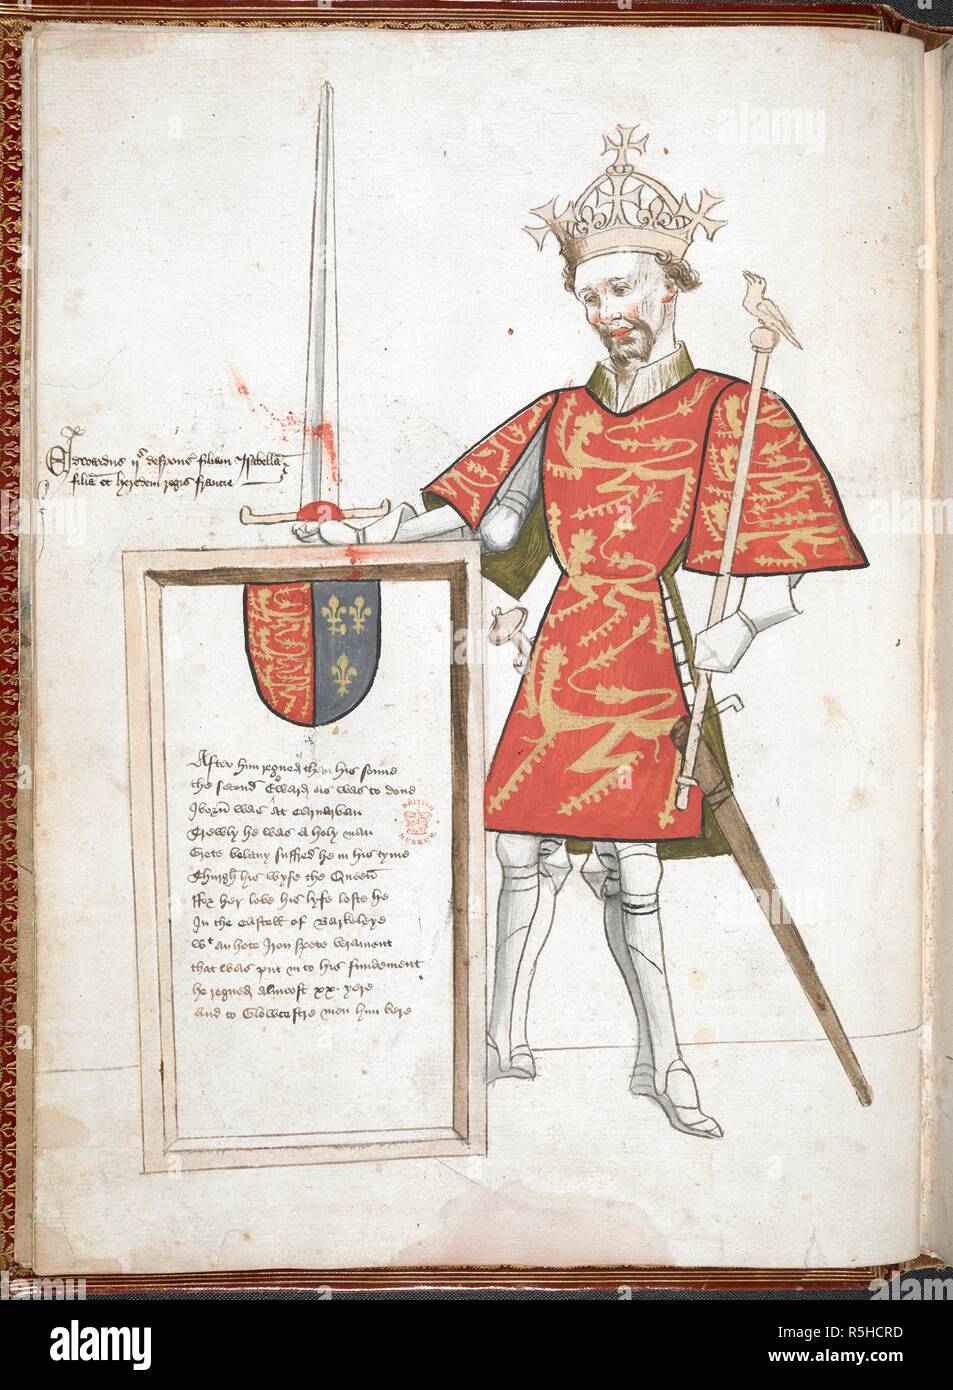 Coloured drawing of an English king in armour and tabard (Edward II), presenting a plaque with verses. Sir Thomas Holme's Book of Arms: anonymous verses on the kings of England ... (Part 1 folios 1 to 8). England, S. E. (probably London); c. 1445-c. 1450. Numerous coloured drawings of English kings in armour and tabard, presenting a plaque with verses. Source: Harley 4205 f.5v. Language: English. Gothic cursive. Stock Photo